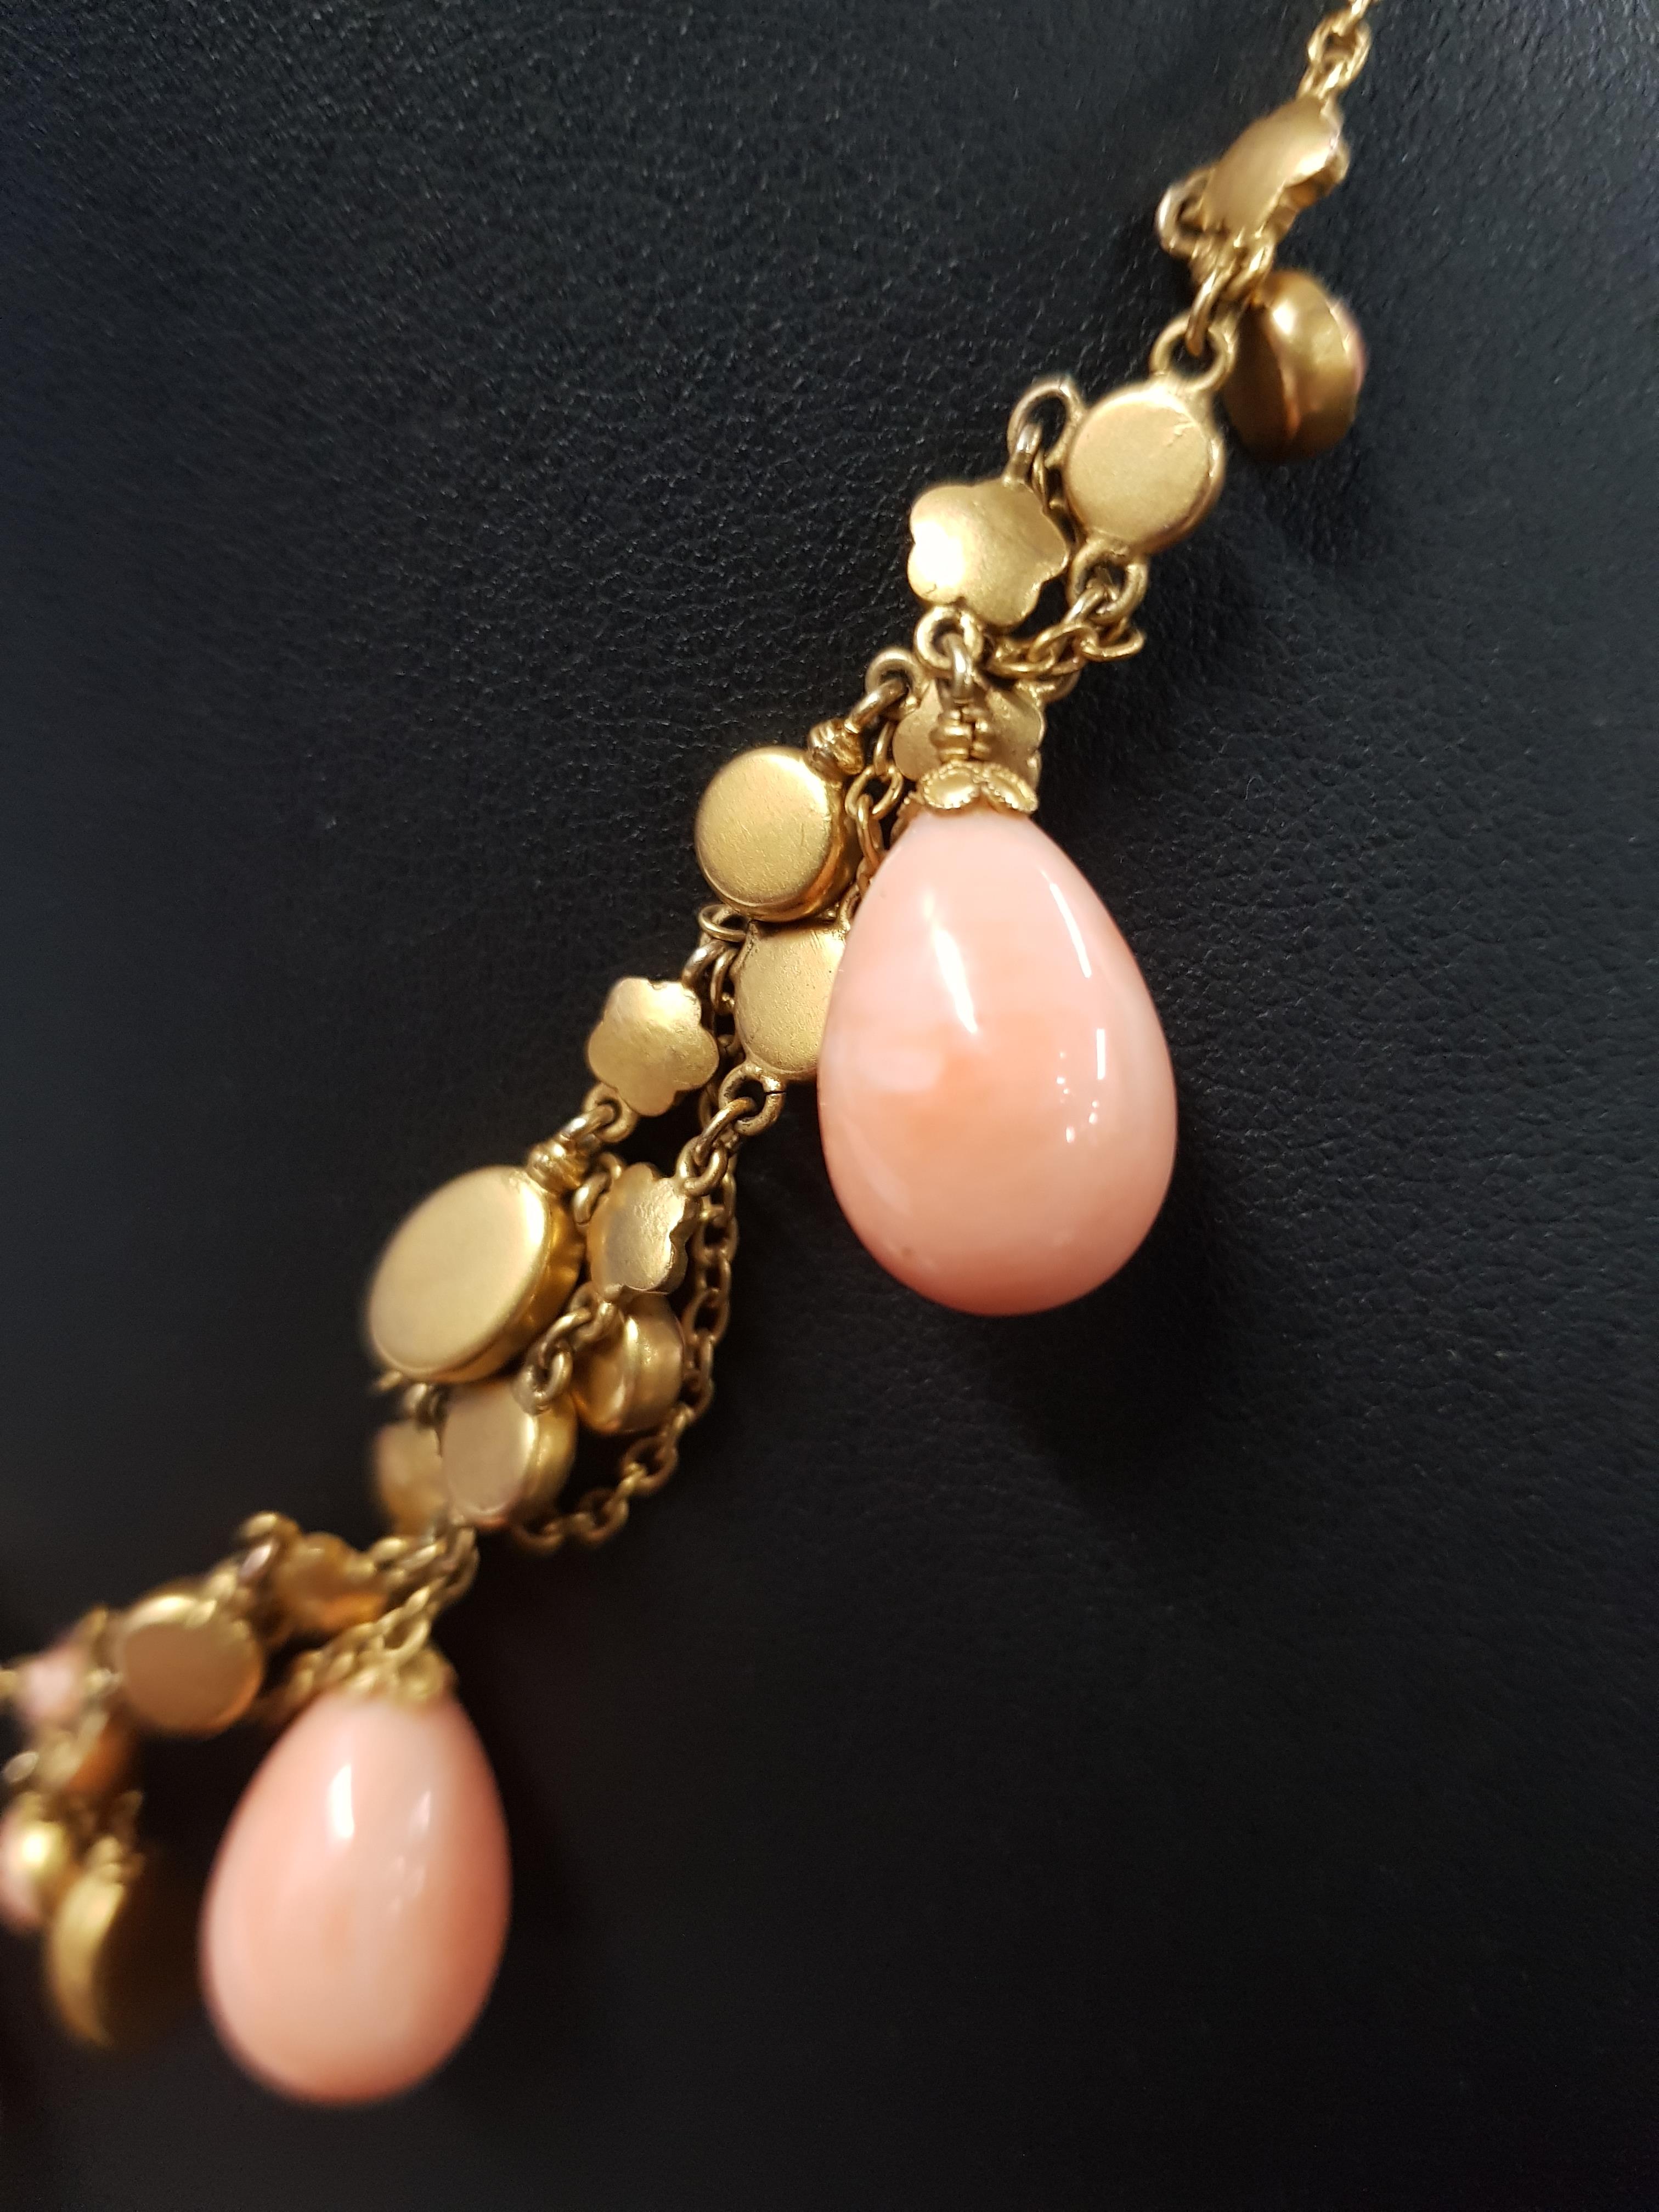 18 CARAT GOLD AND CORAL NECKLACE TOTAL WEIGHT 30.3G - Image 3 of 4